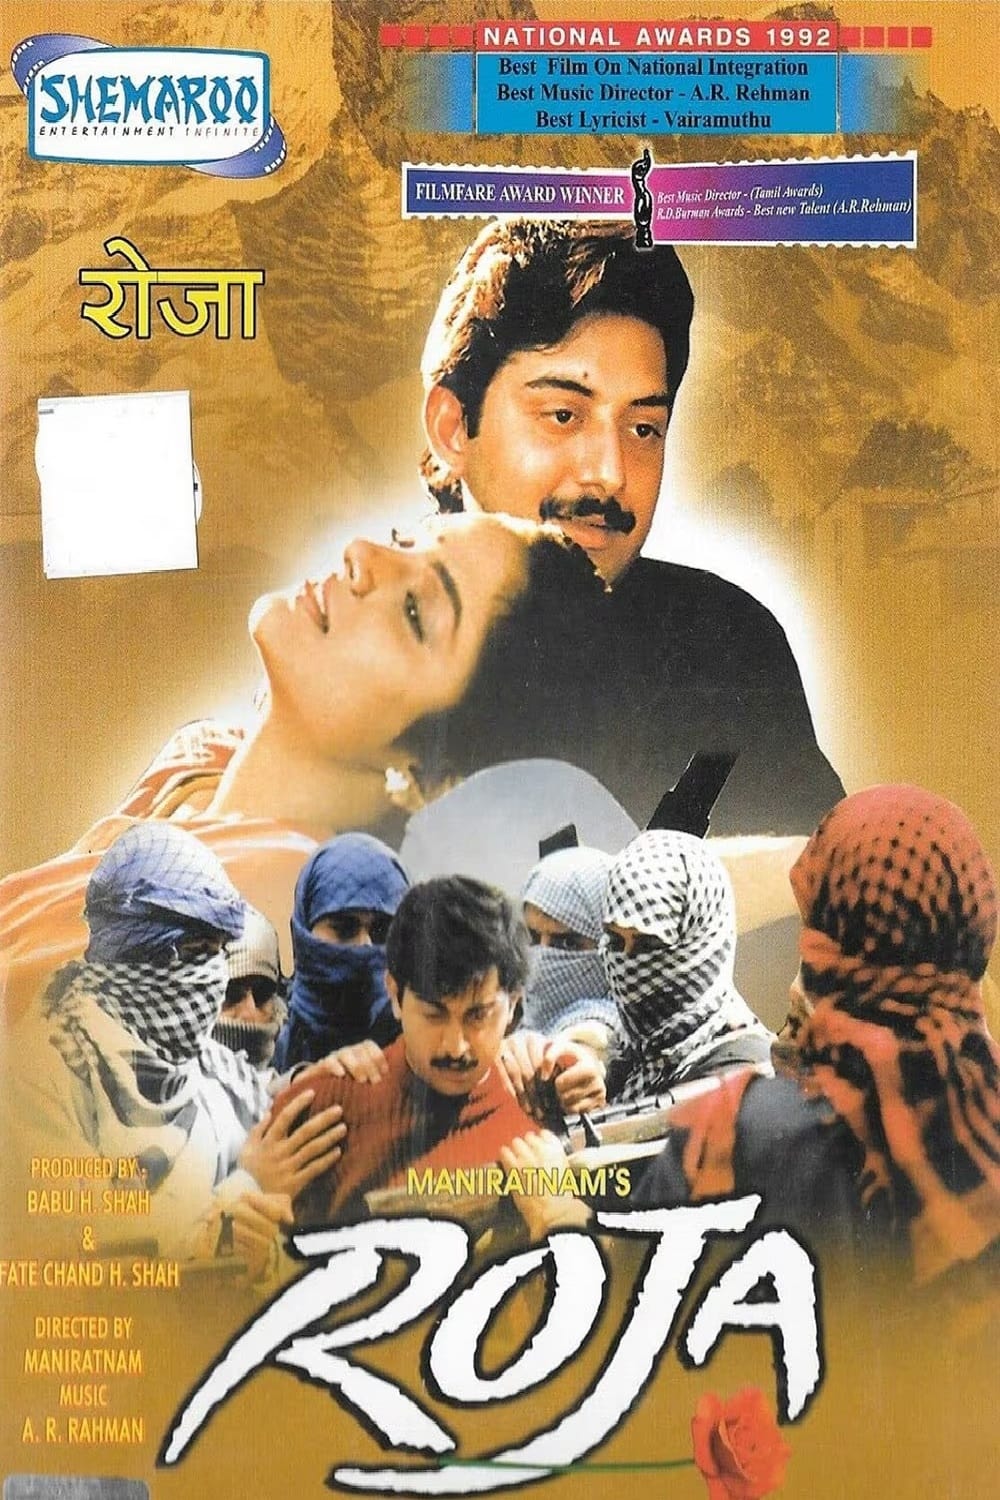 Poster for the movie "Roja"